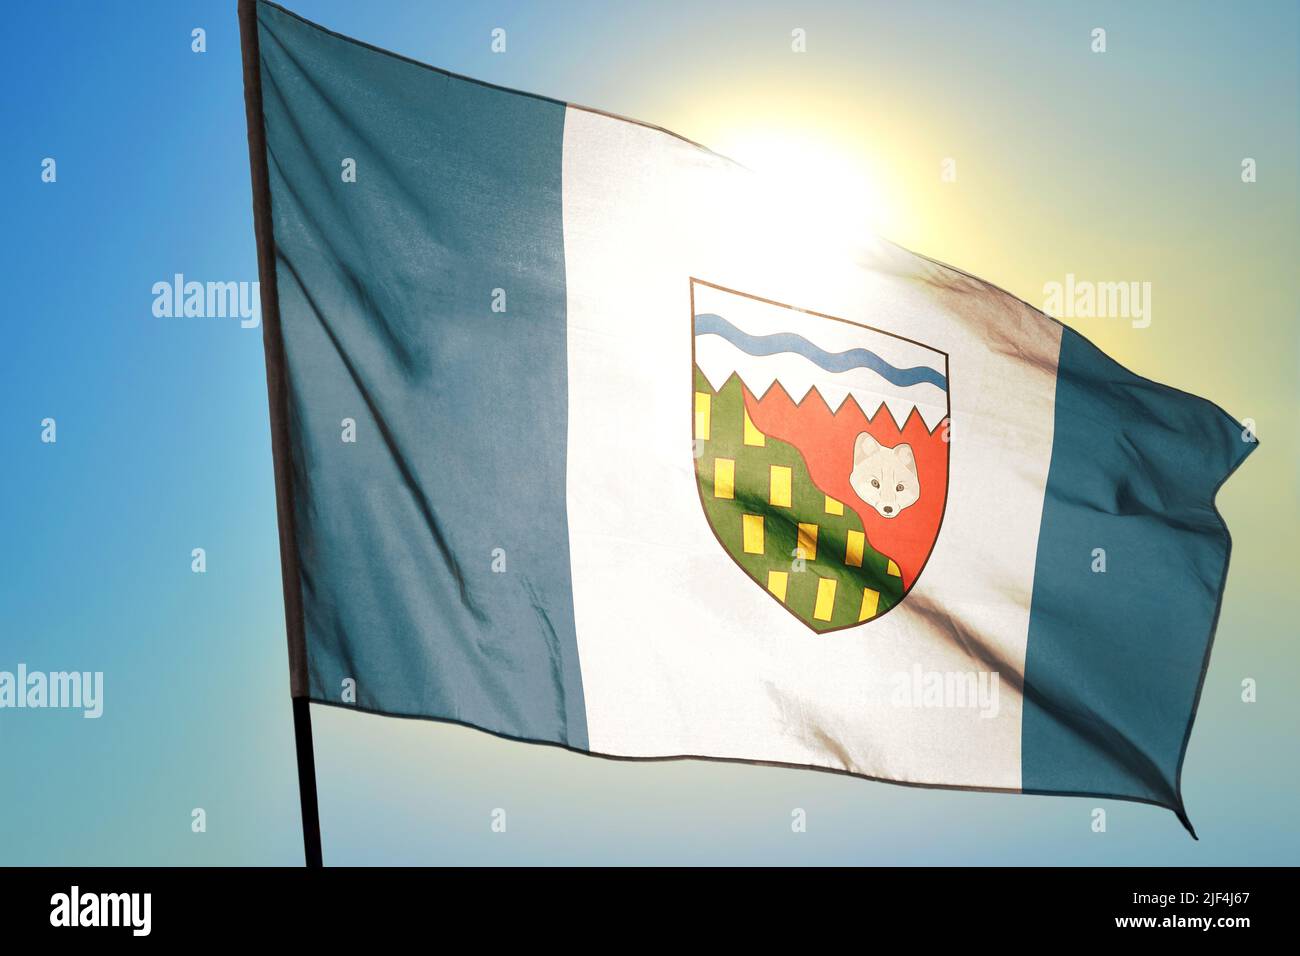 Northwest Territories province of Canada flag waving on the wind Stock Photo